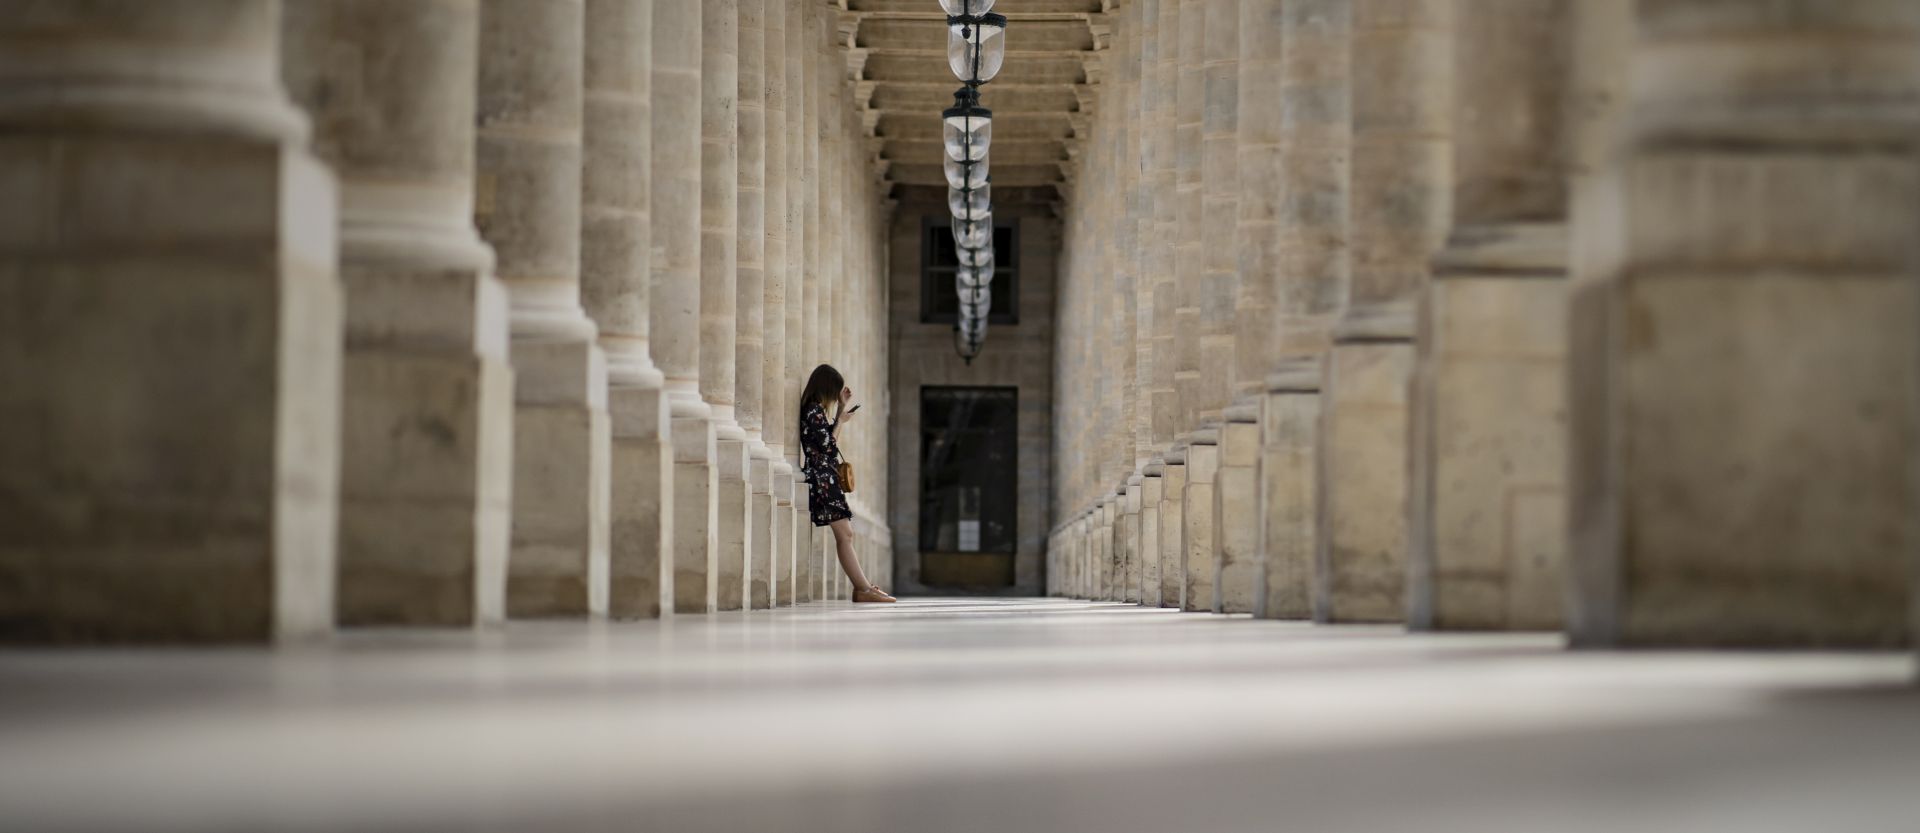 epa08614392 A woman pauses in an arcade of the Palais Royal in Paris, France, 20 August 2020. Paris has been declared a zone of 'active circulation' for the Covid19 coronavirus as cases surged in recent weeks, prompting British tourists vacationing in France to be recalled back to their homeland or face fourteen days quarantine upon arrival. The spike in Covid cases and foreign tourist exodus is affecting Paris' tourism industry, with media reports of hotel reservations down by 86 per cent comparatively to last year.  EPA/IAN LANGSDON